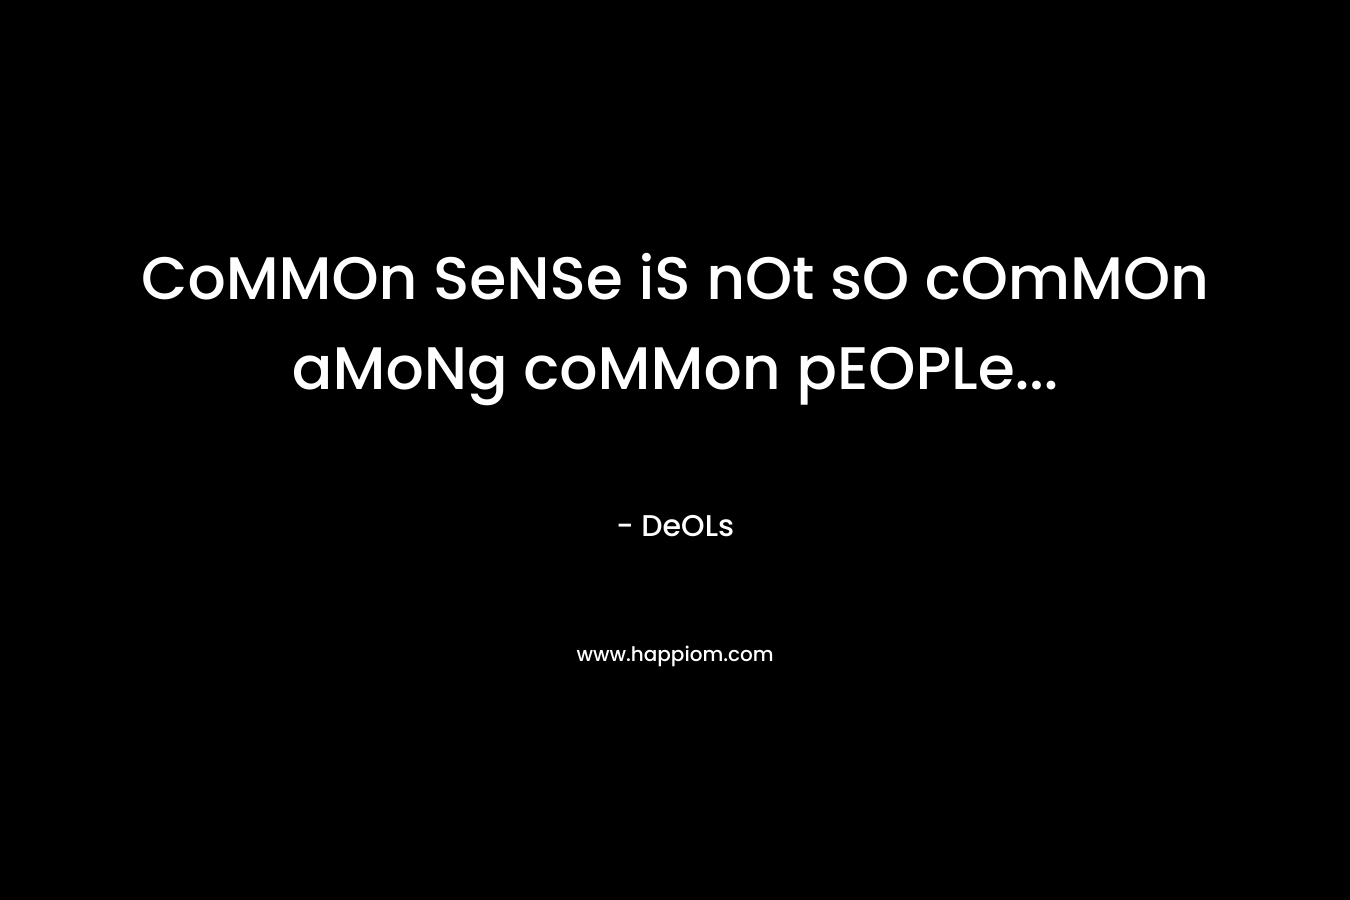 CoMMOn SeNSe iS nOt sO cOmMOn aMoNg coMMon pEOPLe...